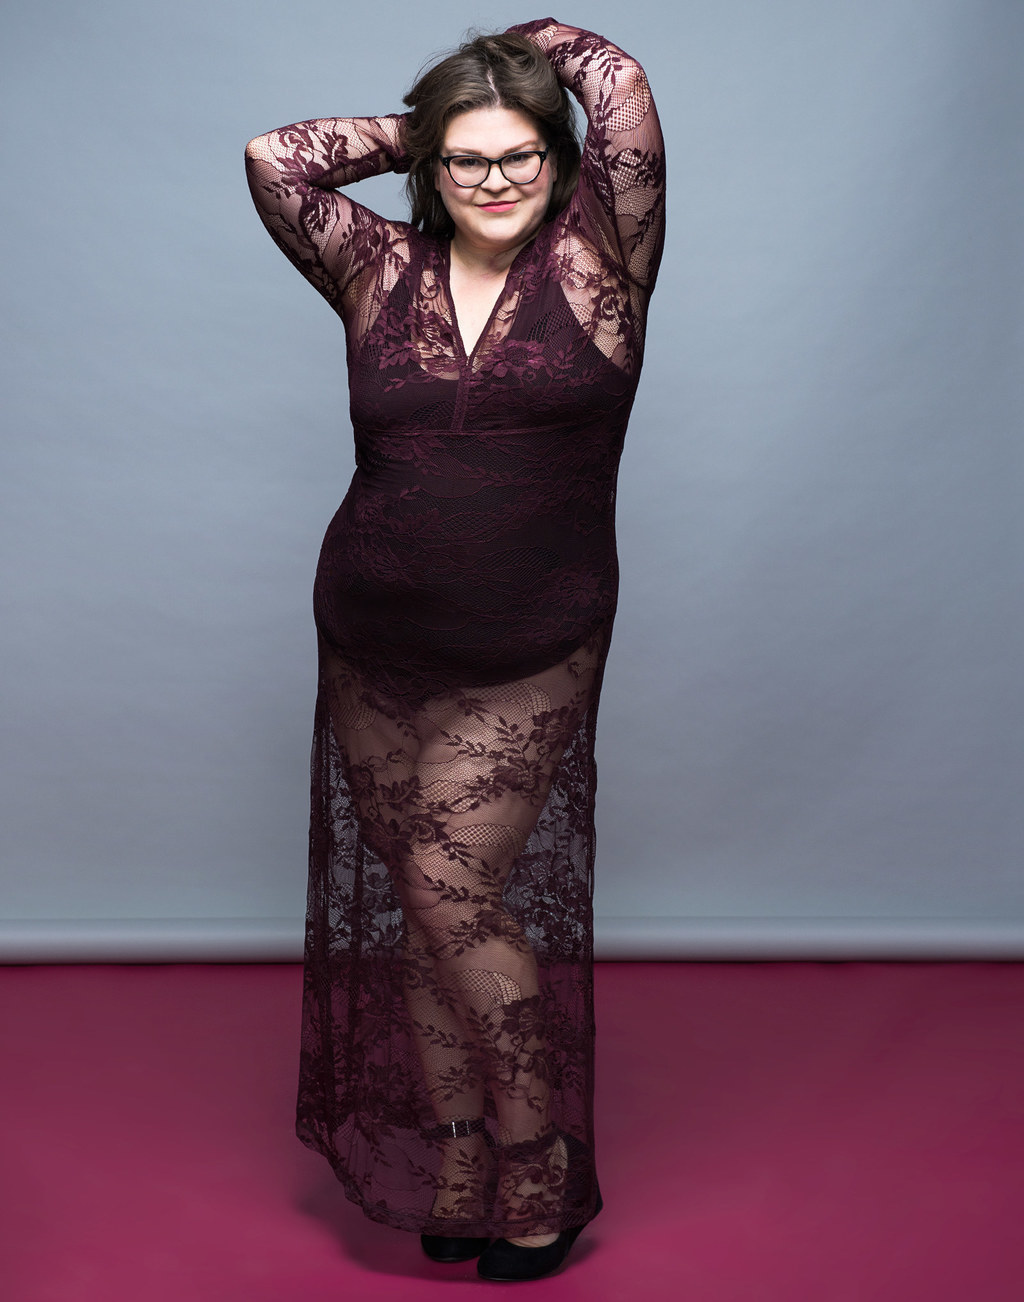 Wore Sheer Clothes As A Plus-Size Woman ...